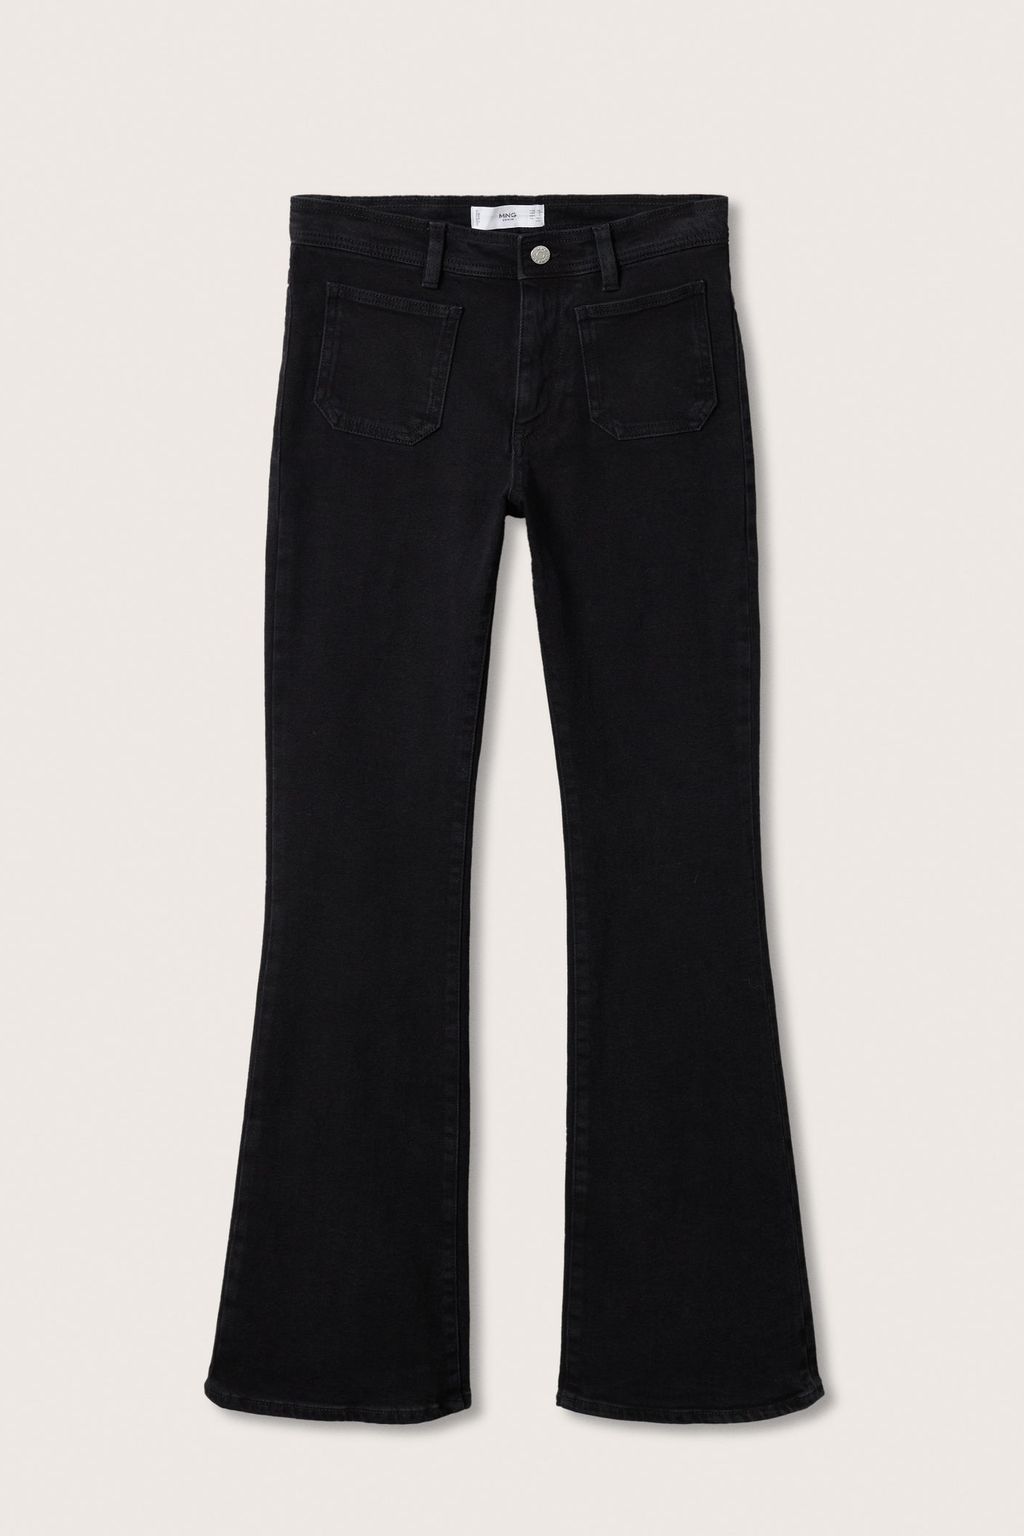 25 Best Black Jeans for Women in 2023 | Marie Claire